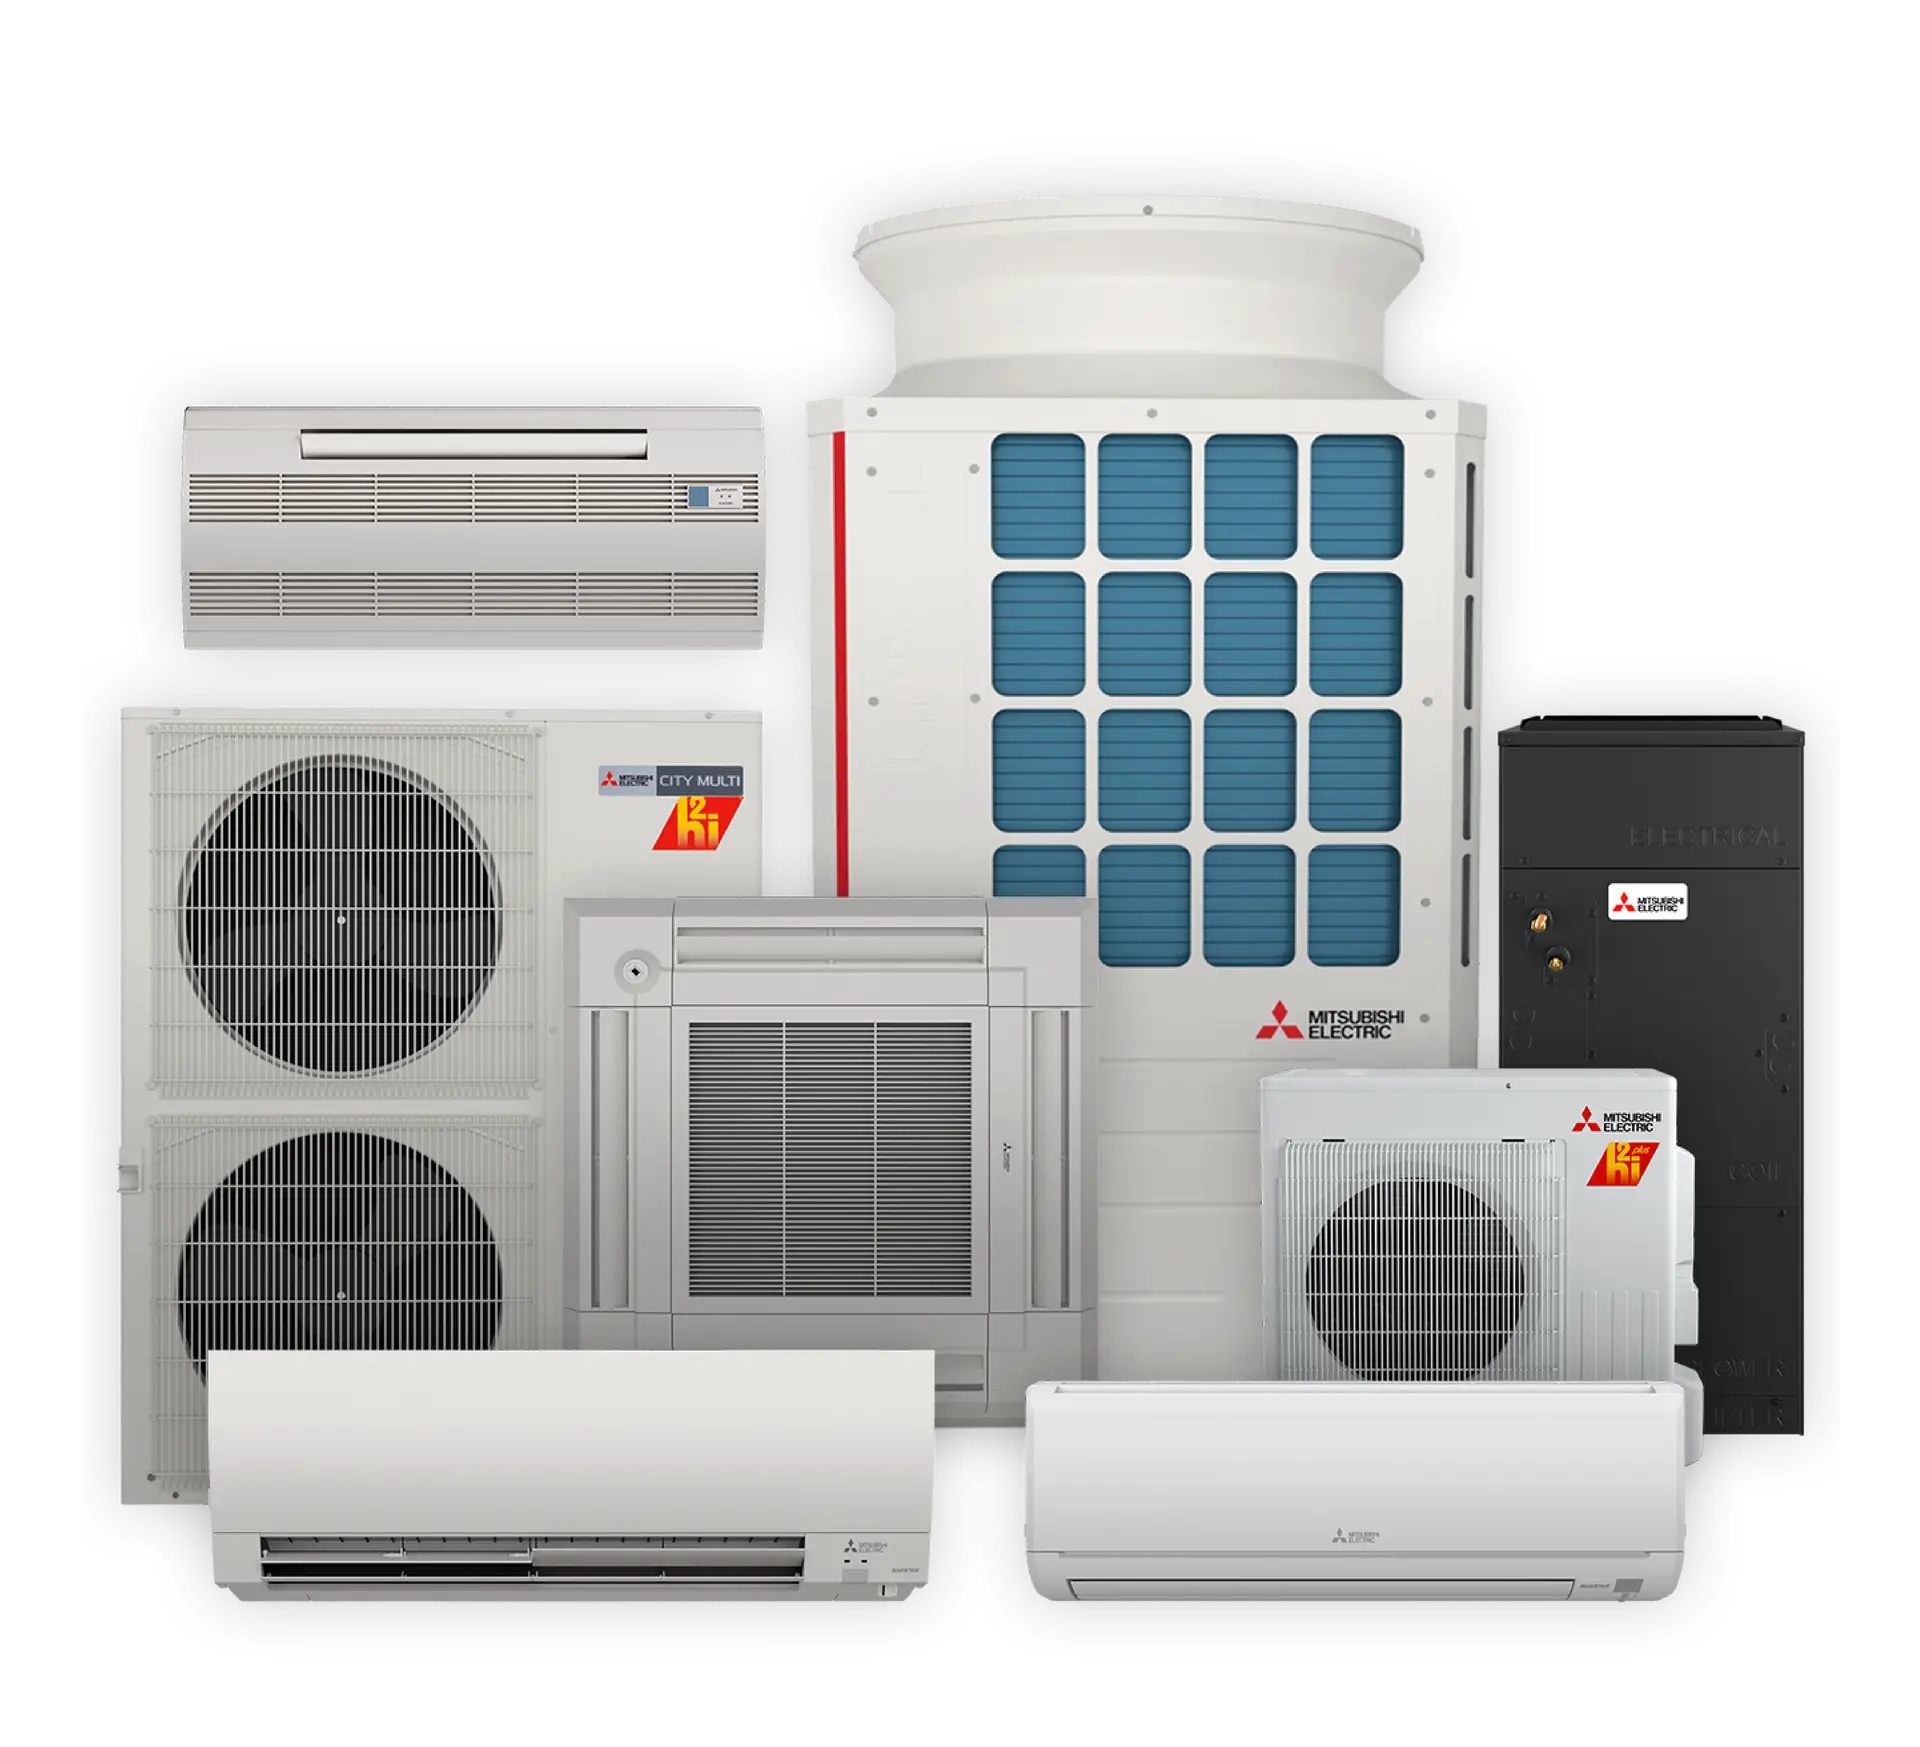 Mitsubishi HVAC systems are renowned for their cutting-edge technology and exceptional performance in providing indoor comfort. Mitsubishi Electric, a leader in the HVAC industry, offers a wide range of heating, ventilation, and air conditioning solutions designed to cater to both residential and commercial needs.